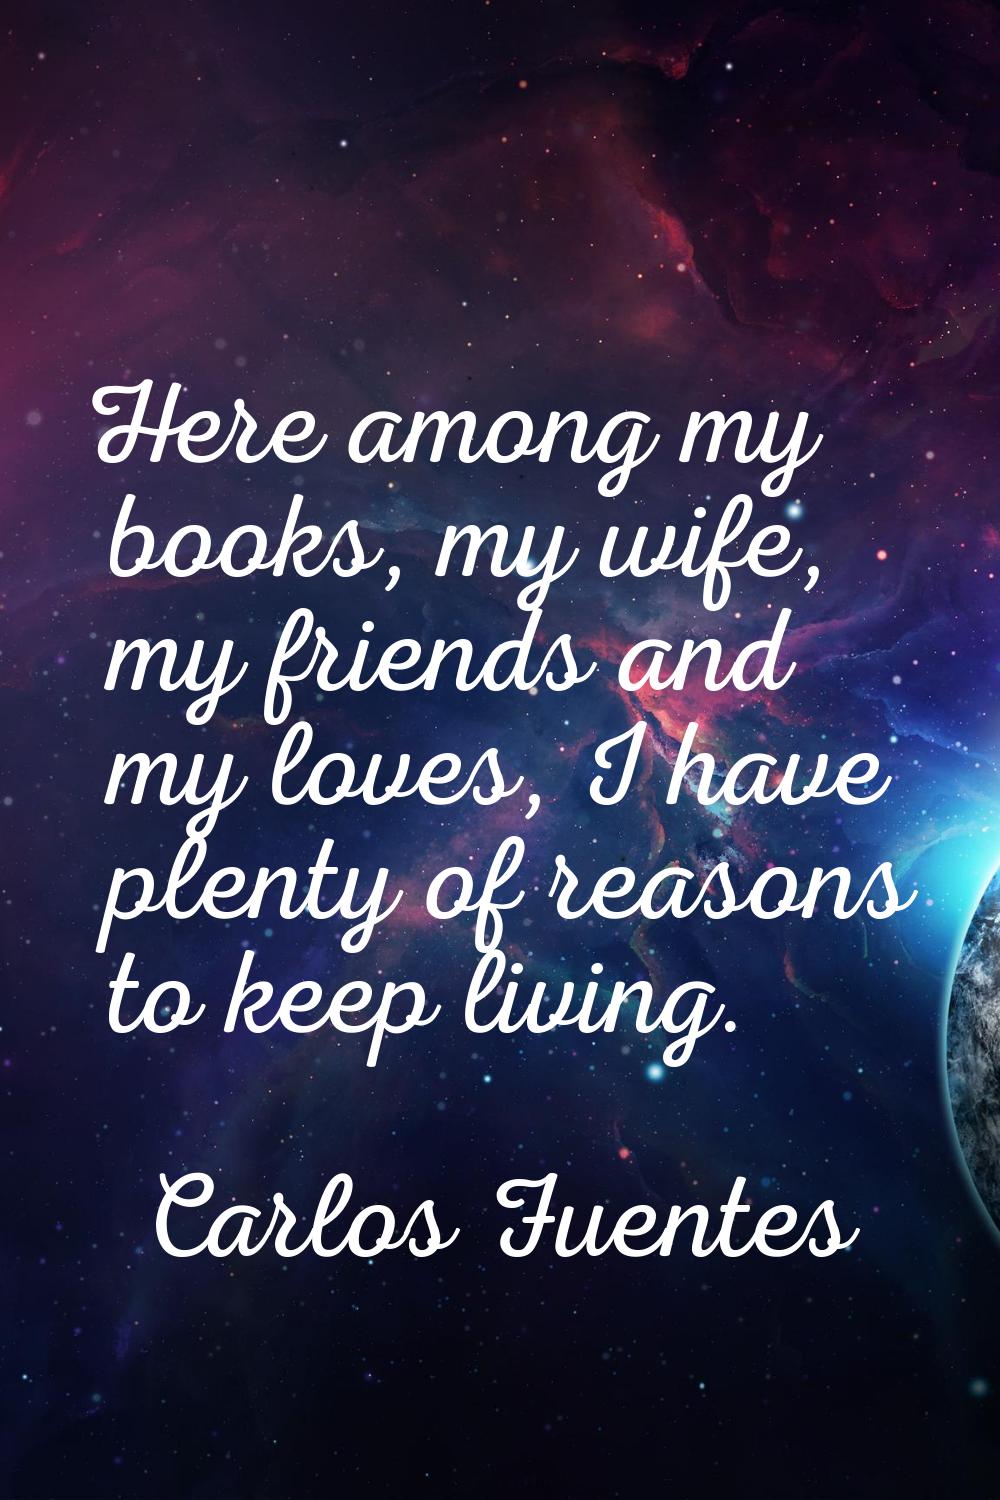 Here among my books, my wife, my friends and my loves, I have plenty of reasons to keep living.